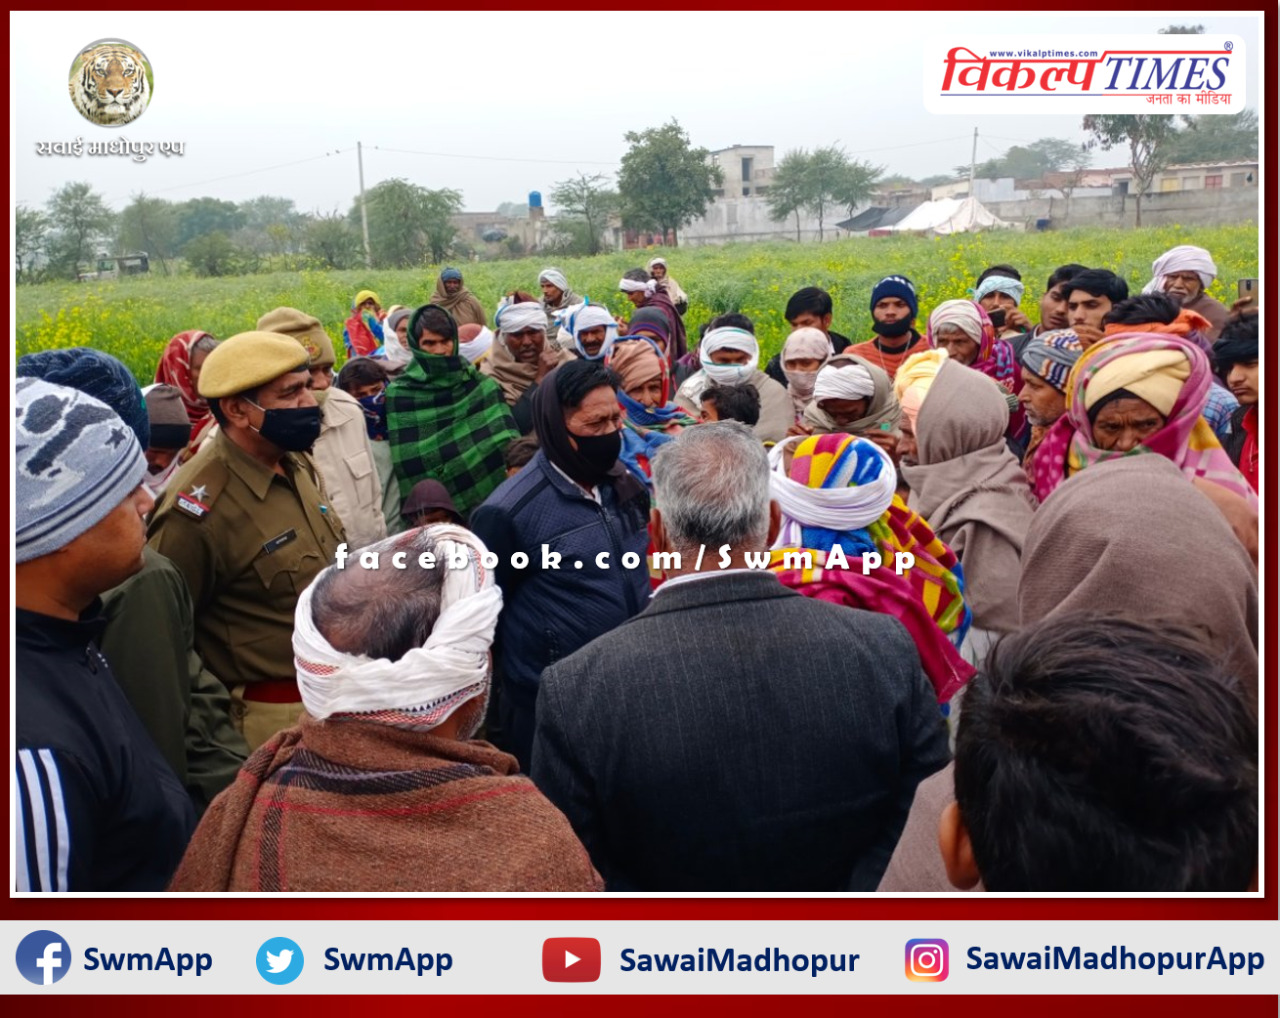 The situation of confrontation between the two parties over the graveyard land in malarna dungar sawai madhopur